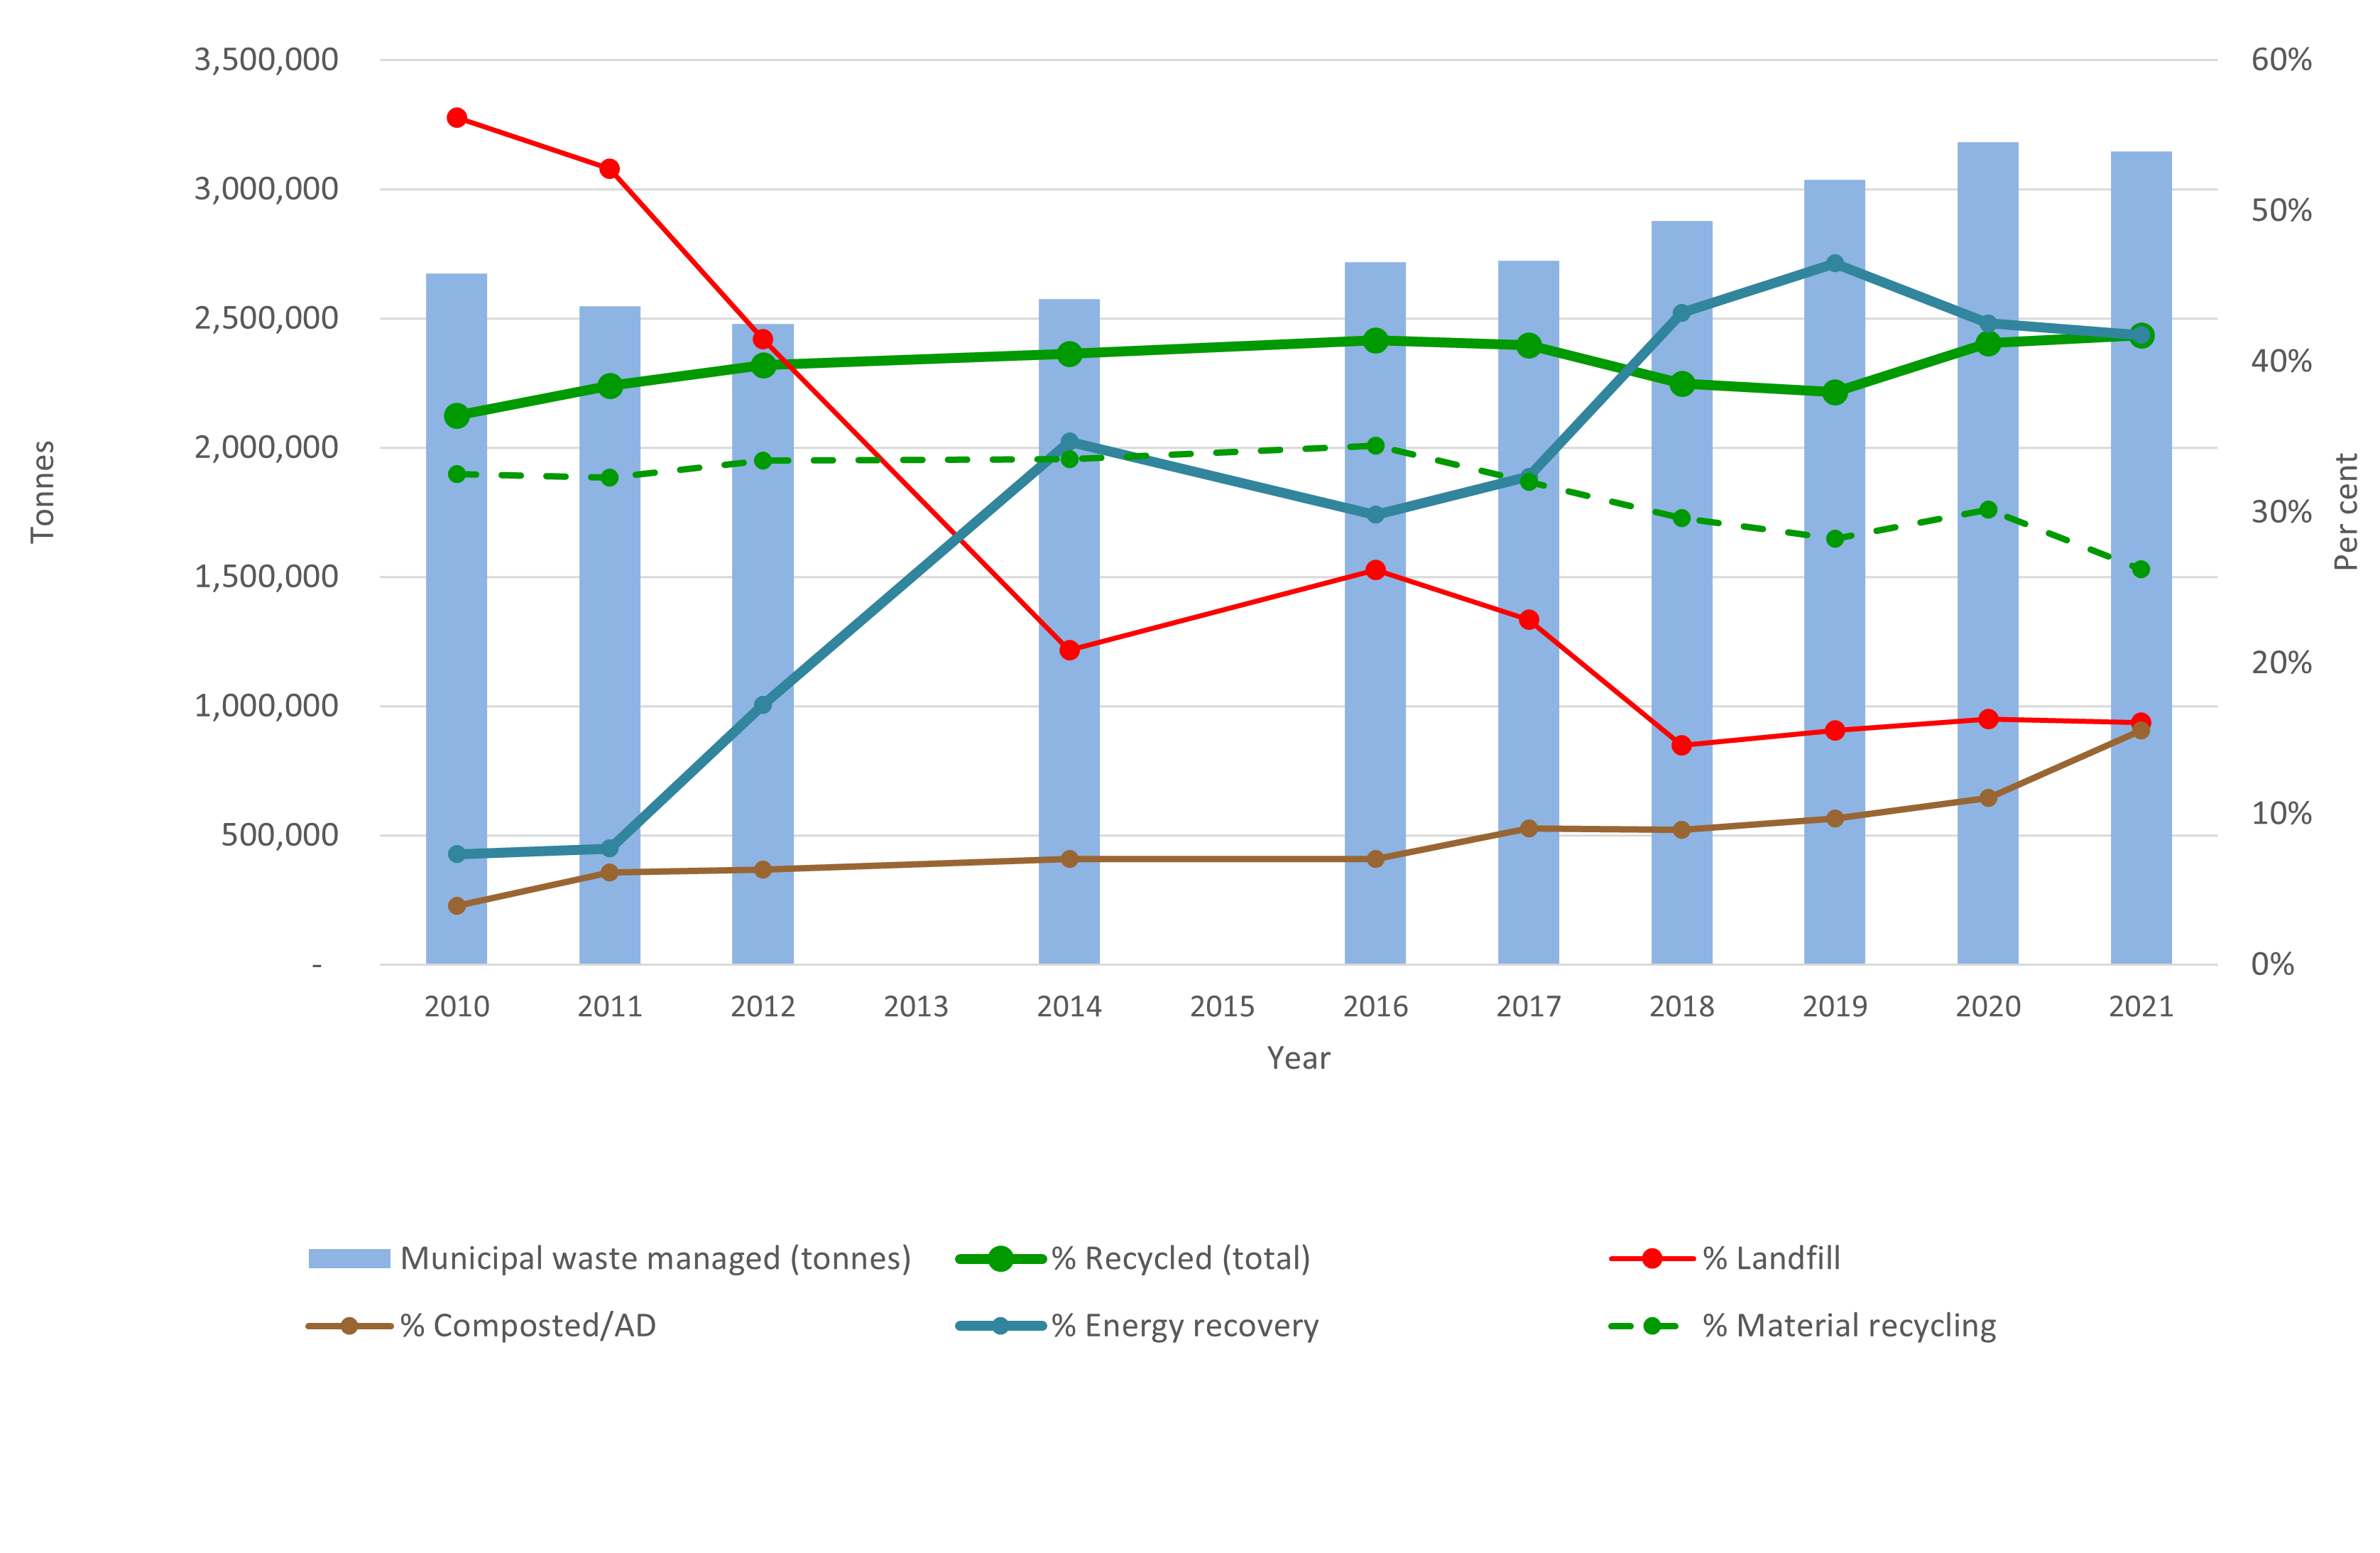 Graph displaying trends in the management of municipal waste from 2010 to 2021